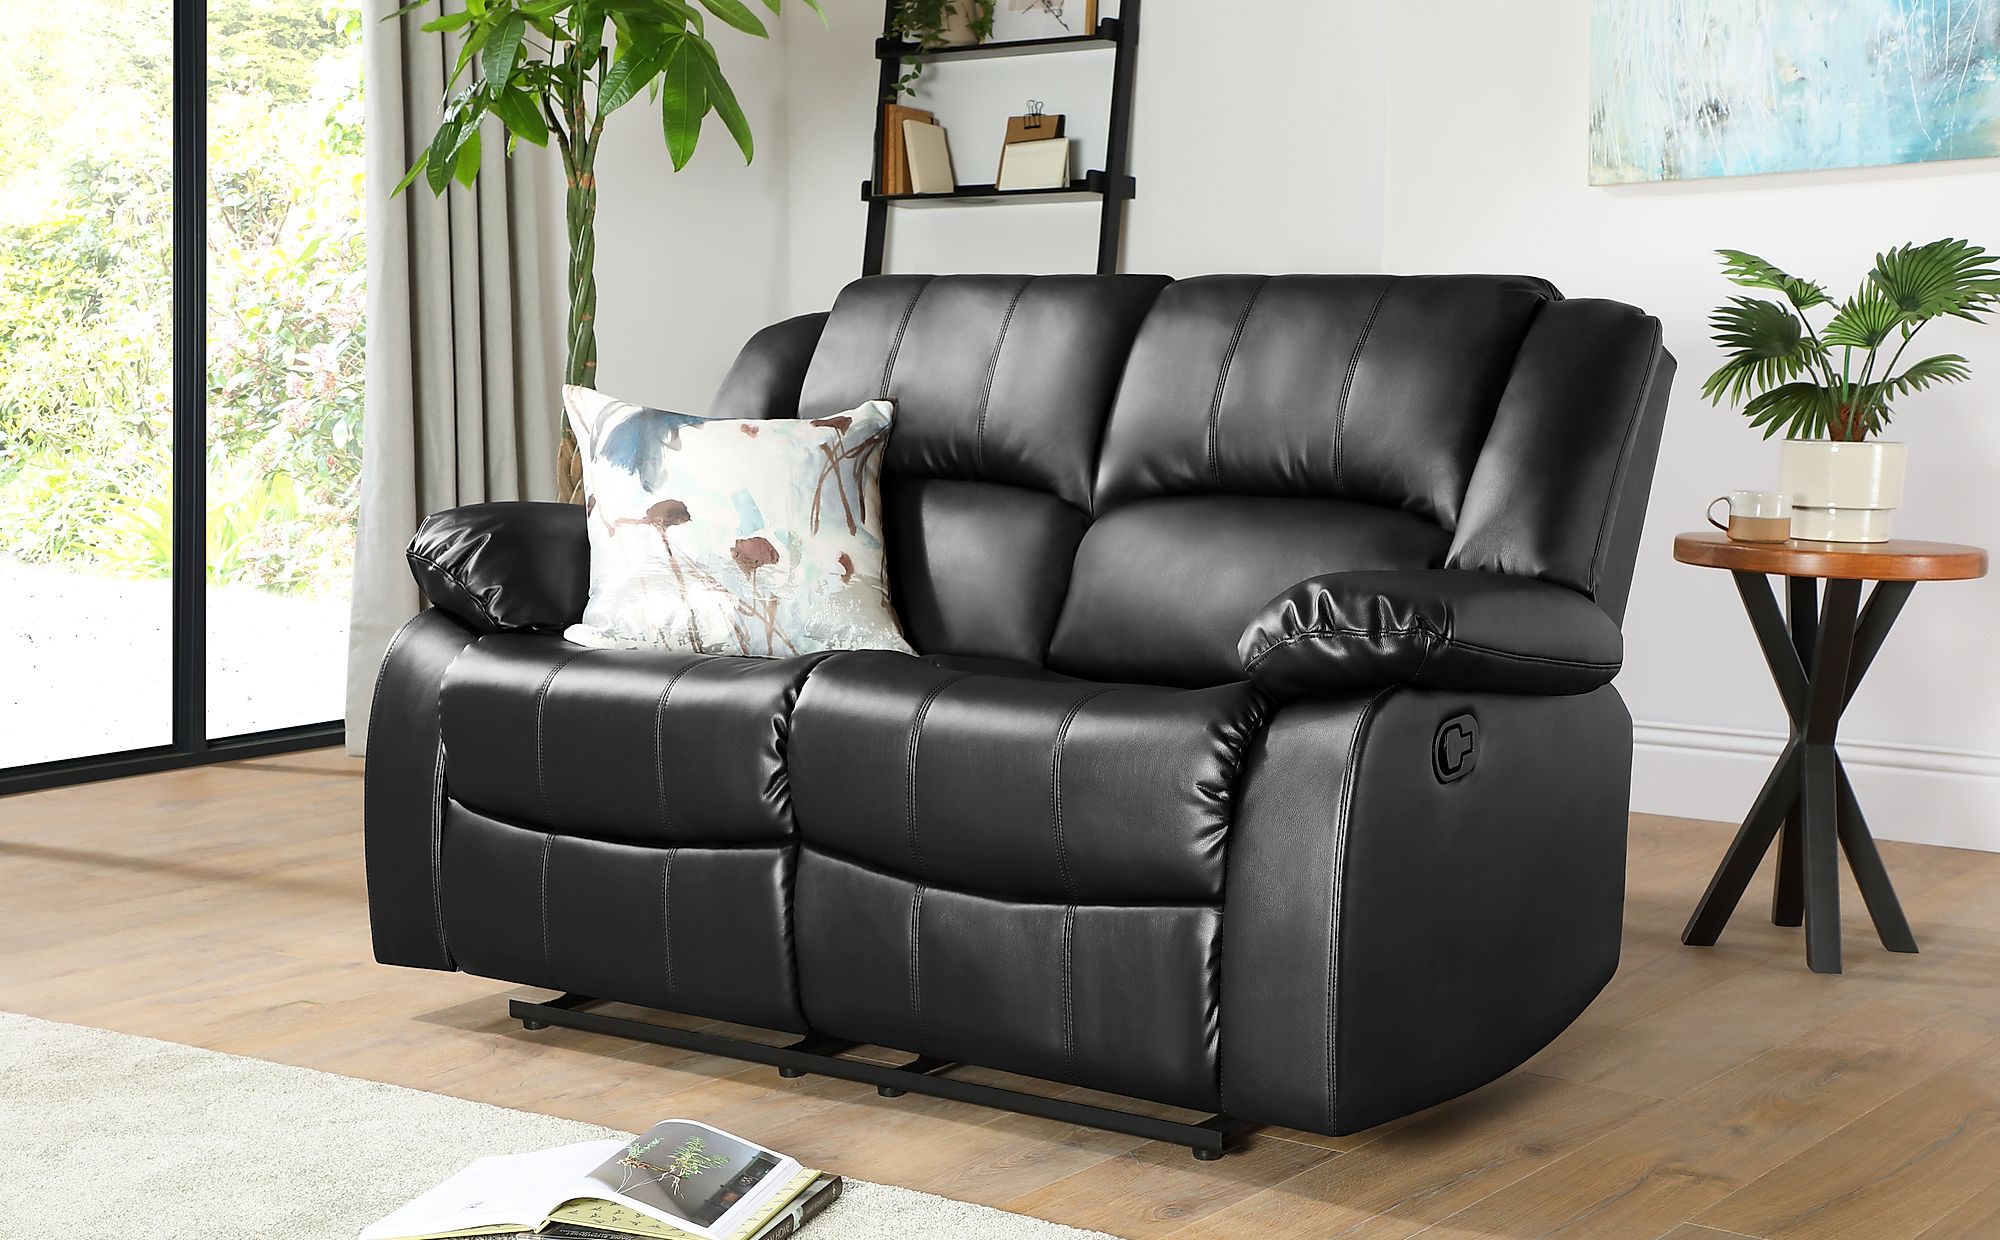 black leather recliner sofa and chair